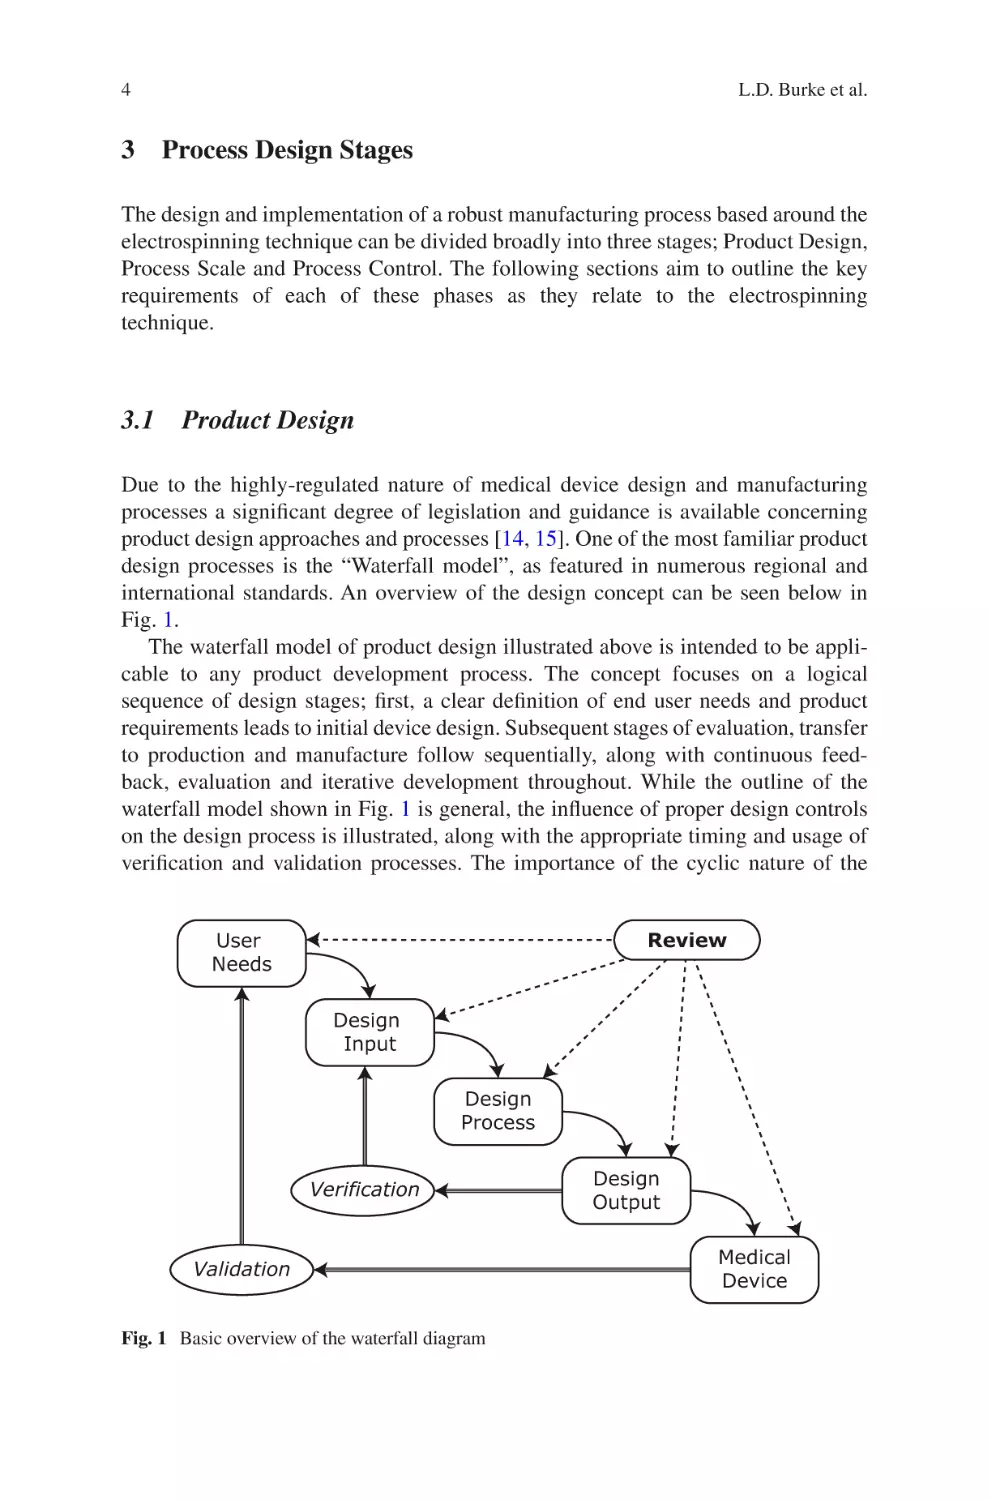 3 Process Design Stages
3.1 Product Design